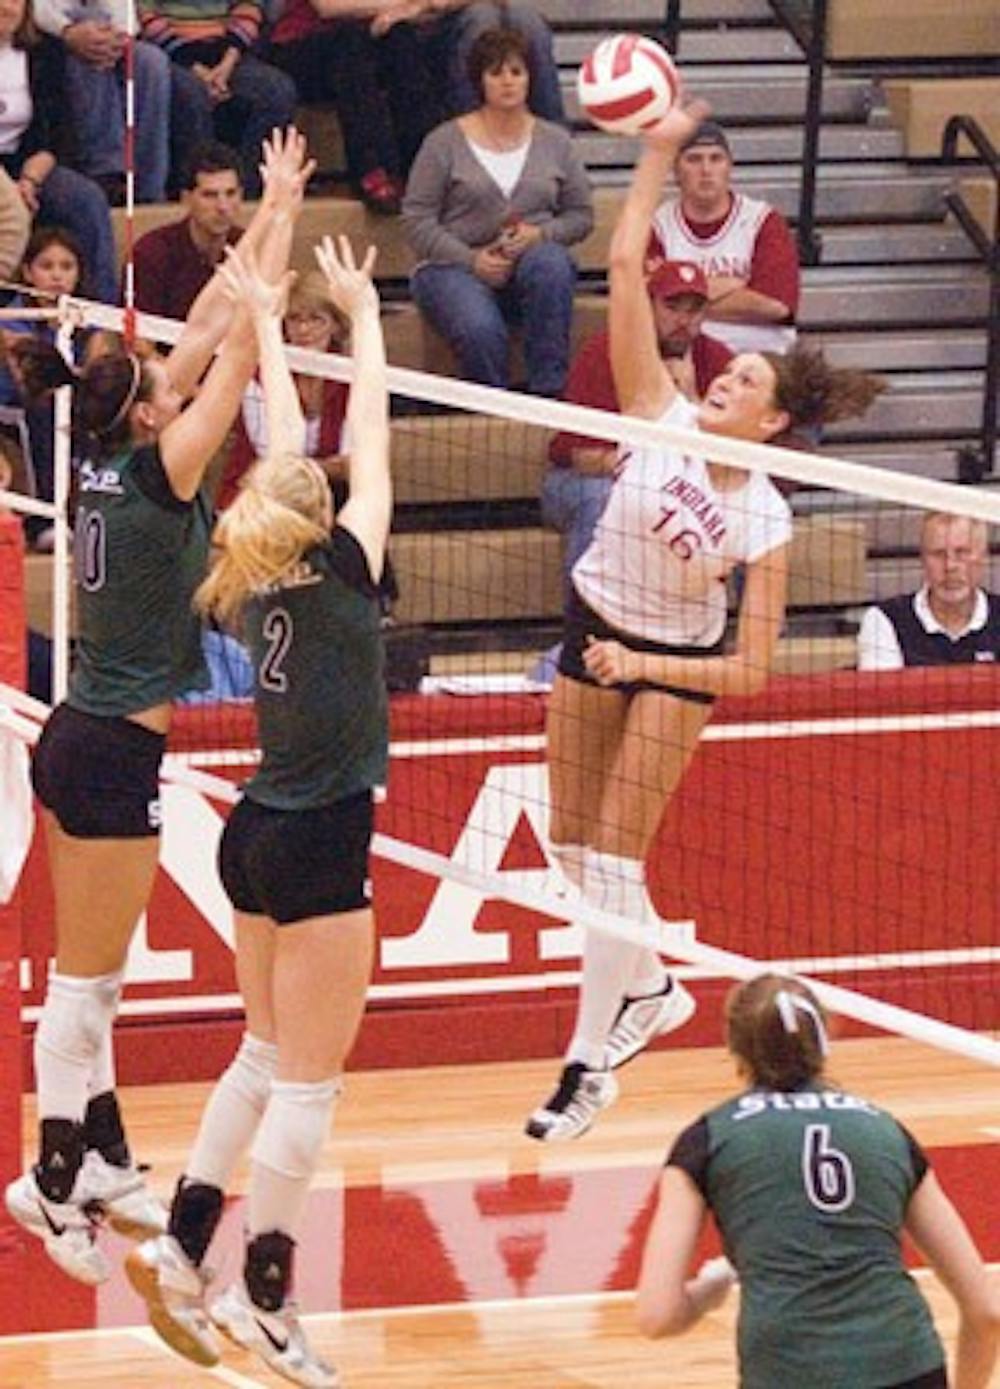 IDS File Photo
Junior outside hitter Gabrielle Allison prepares a spike against Michigan State juniors Jessica Hohl and Ashley Schatzle Nov. 24, 2006 evening at the University Gym.  The Hoosiers lost to the Spartans 3-0.